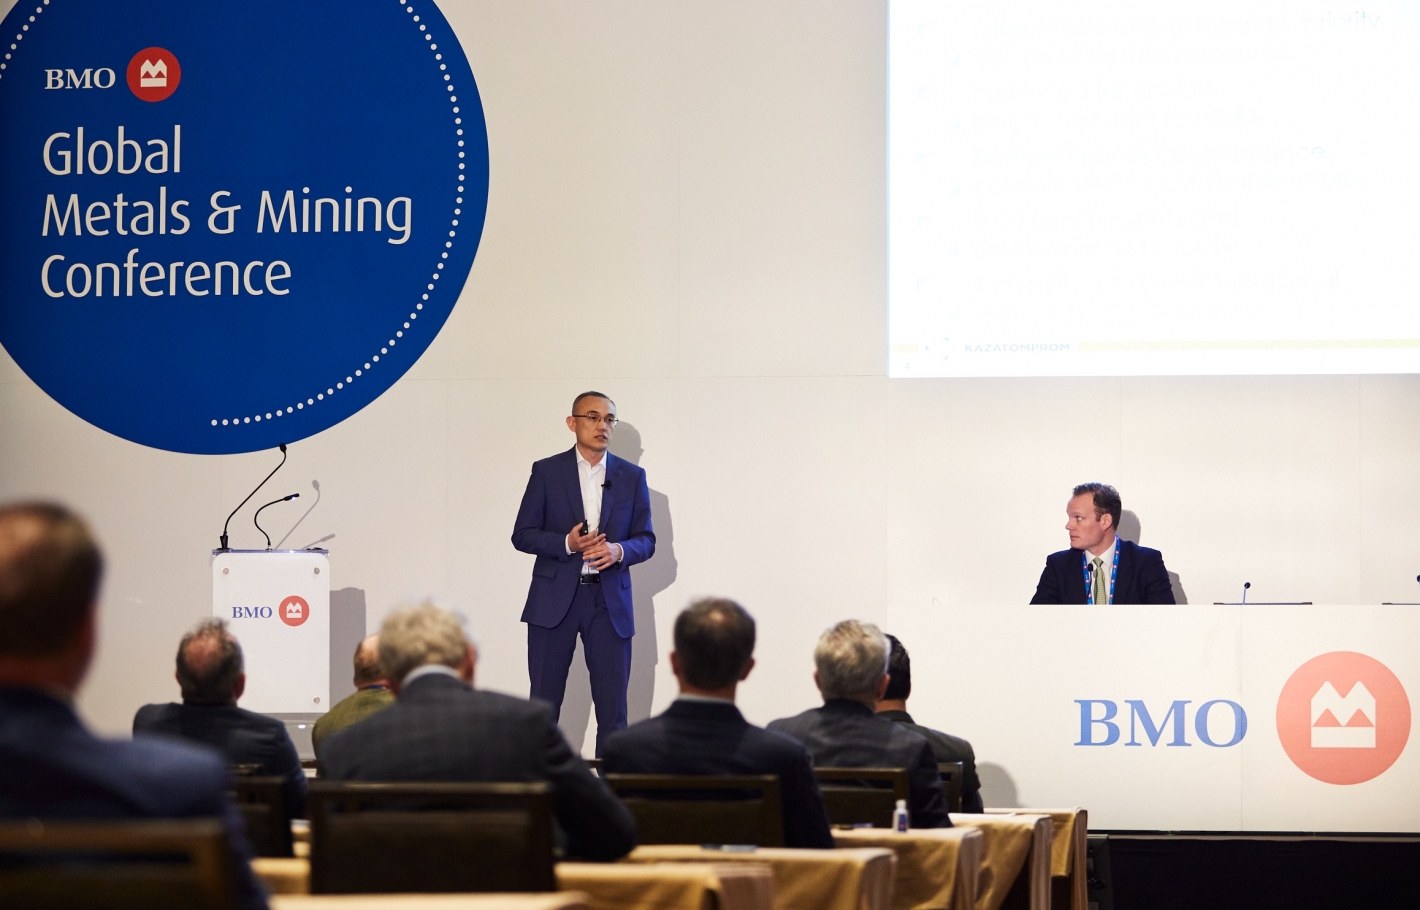 Kazatomprom attends BMO Global Metals and Mining Conference